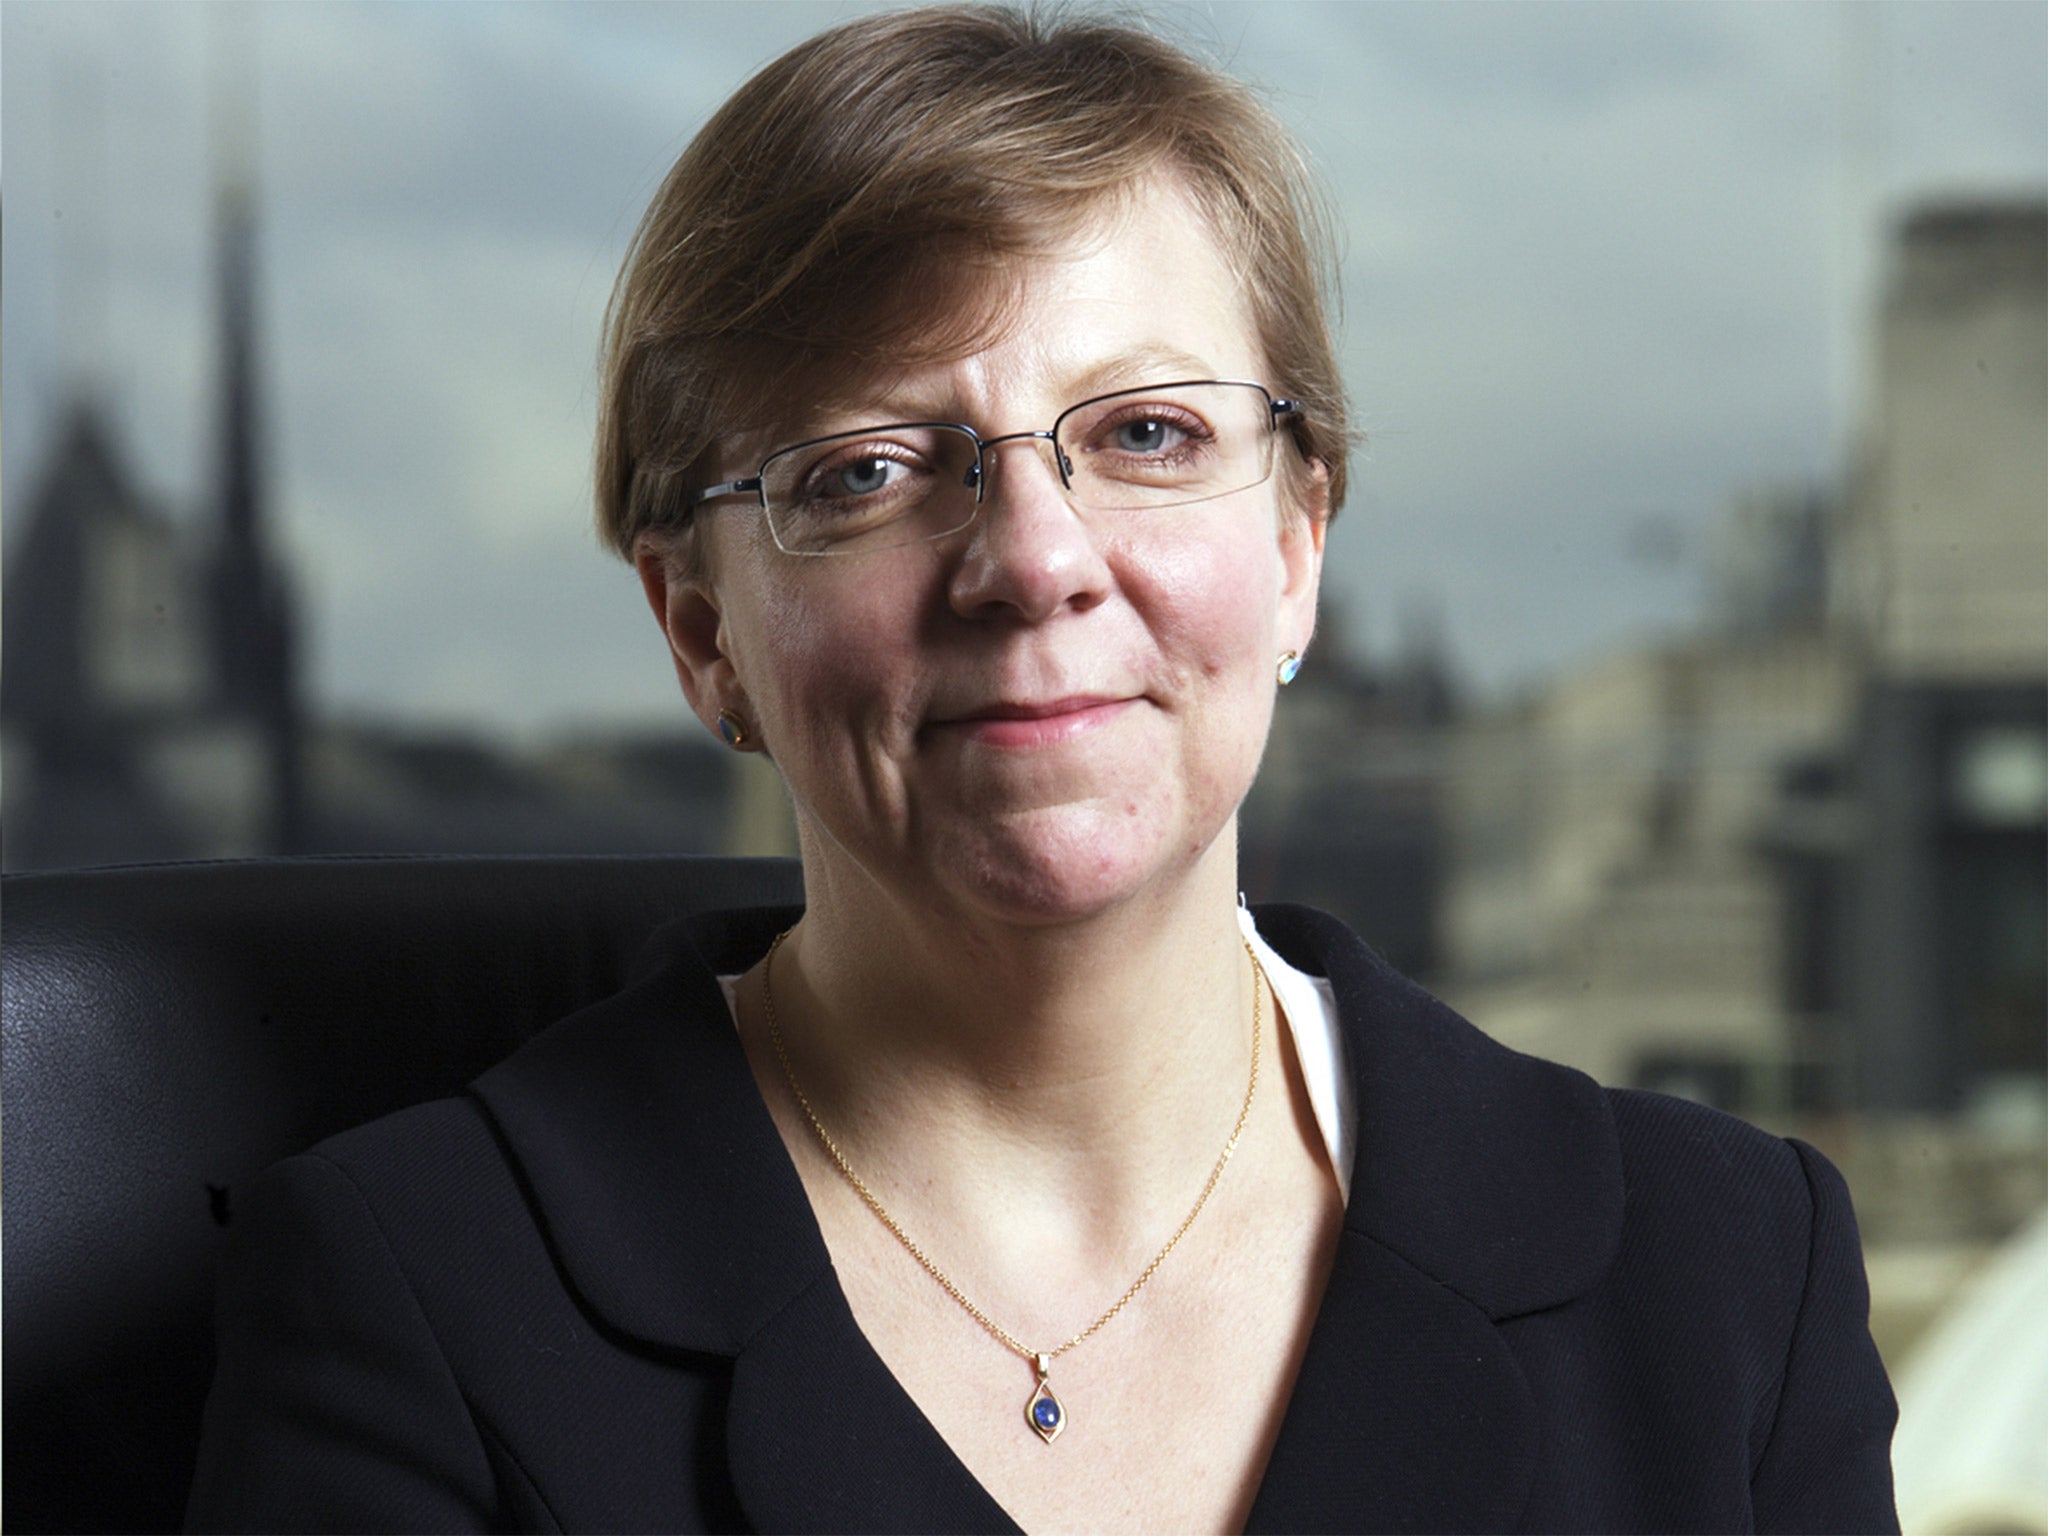 Alison Saunders, Director of Public Prosecutions